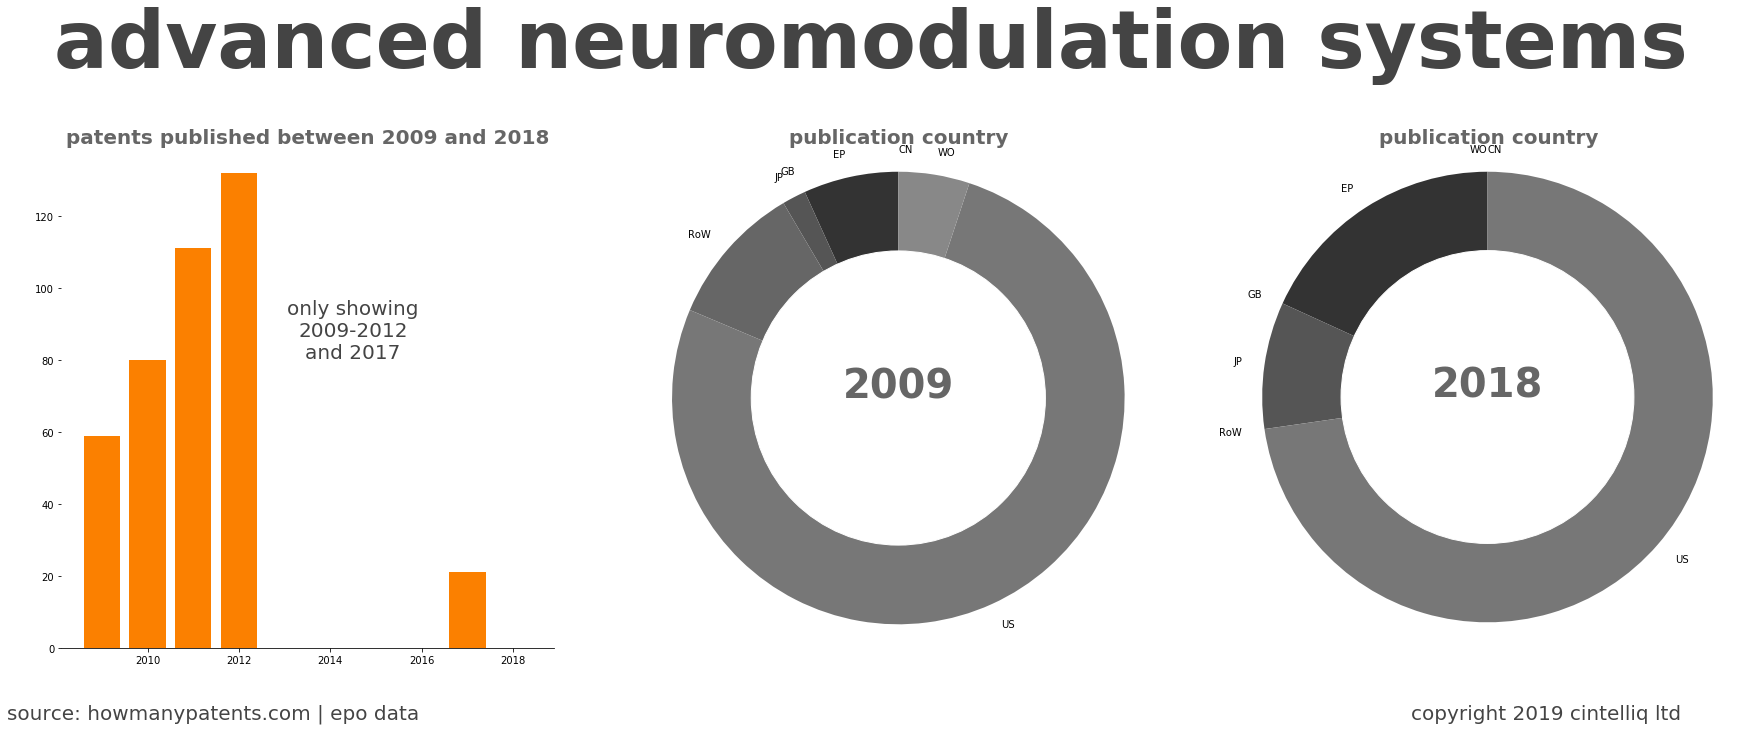 summary of patents for Advanced Neuromodulation Systems